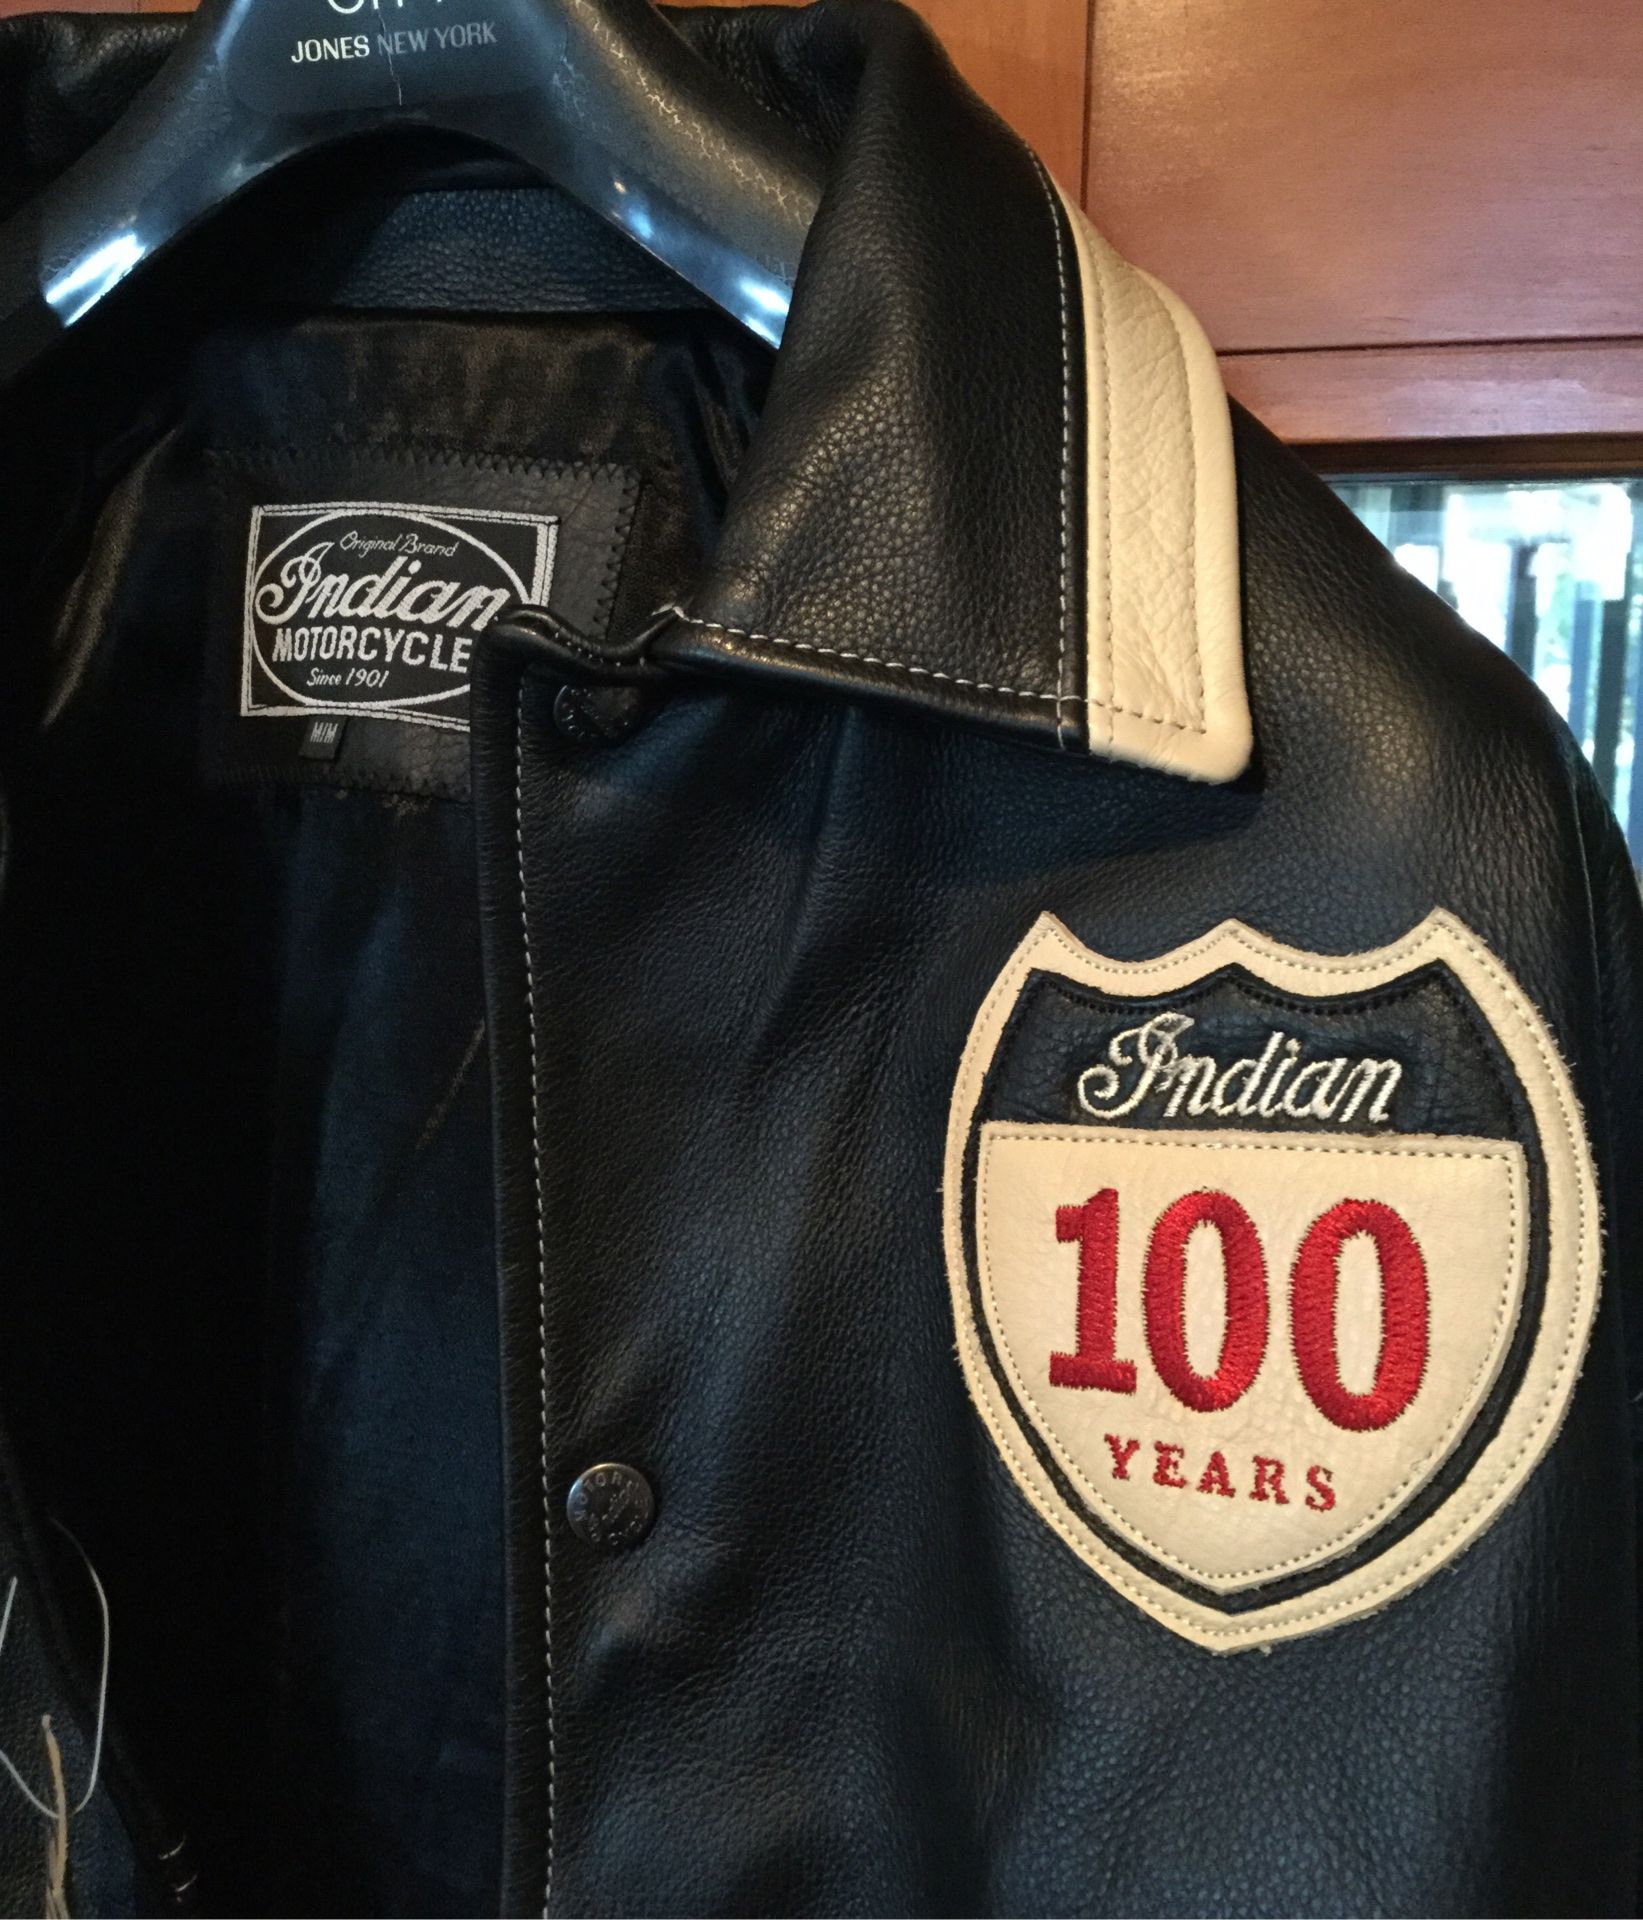 Indian Motorcycle 100th Anniversary Jacket - Never worn!